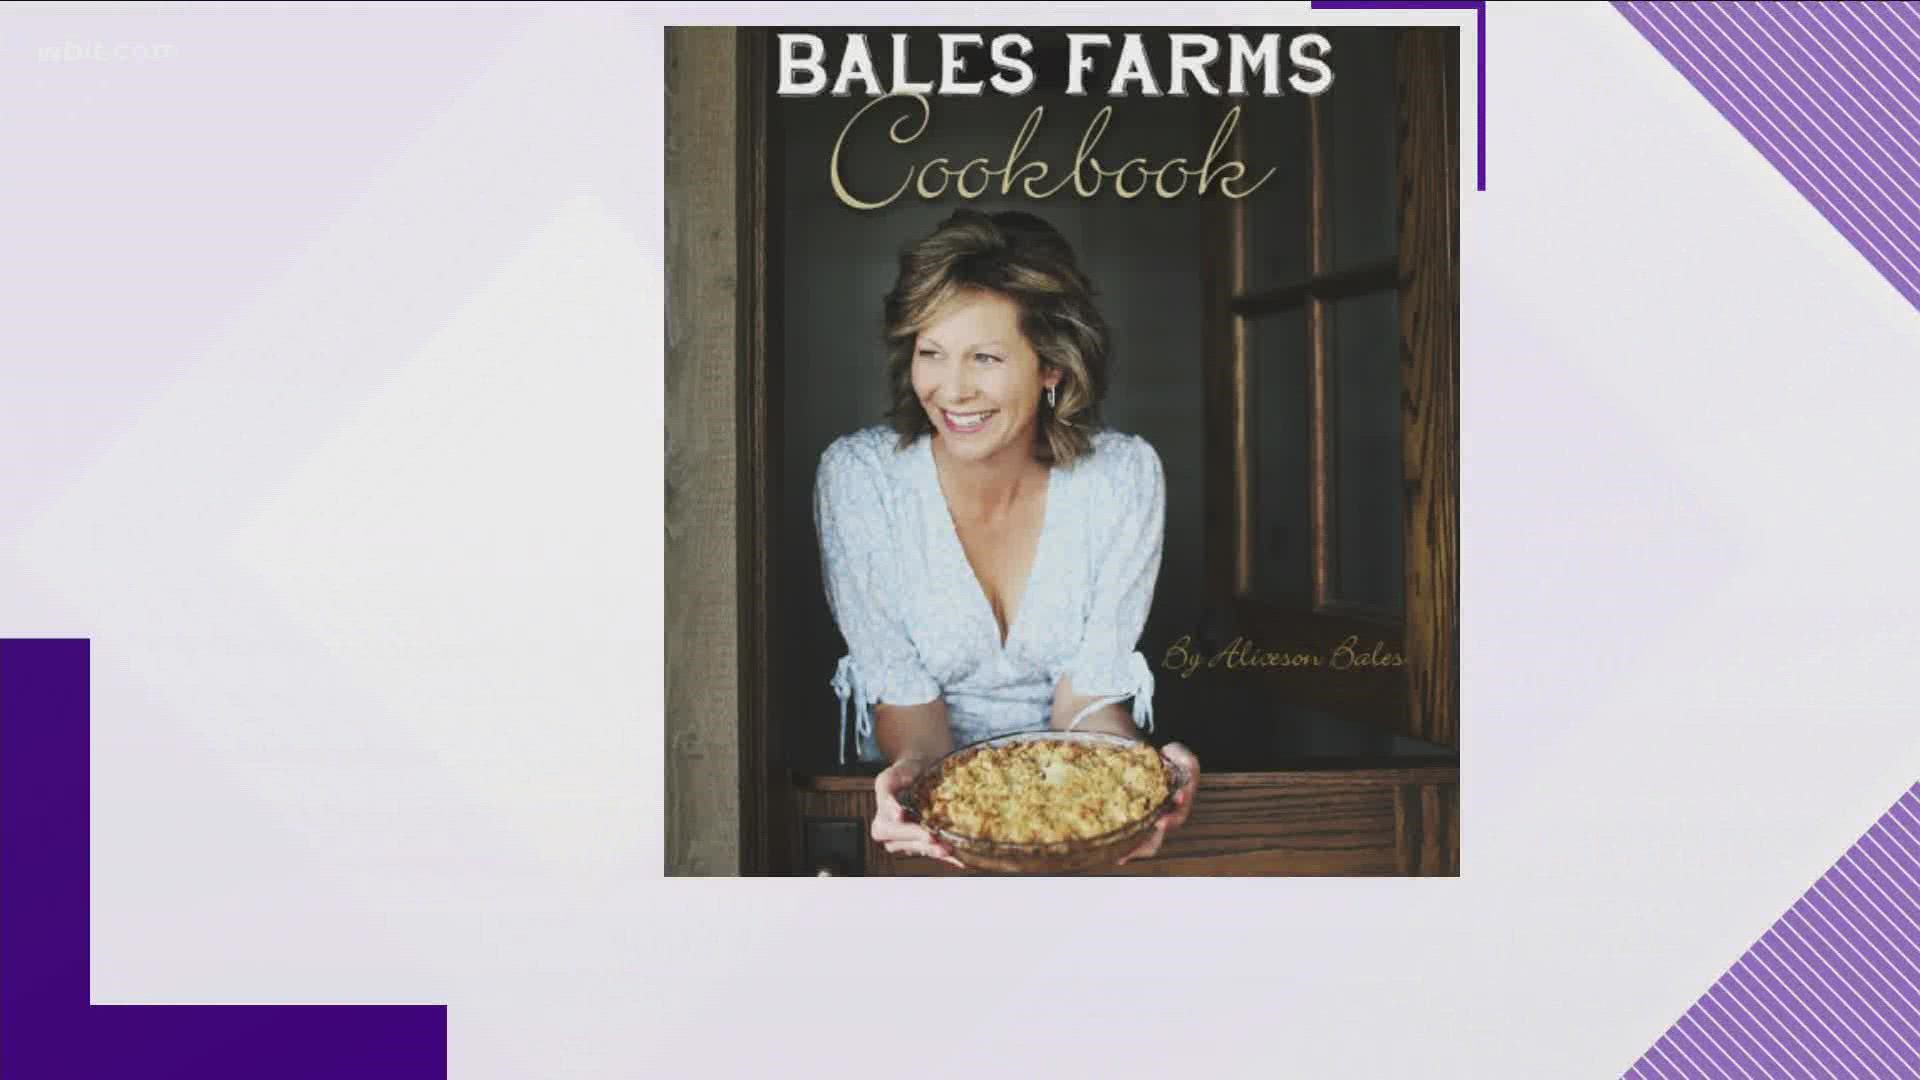 Barry and Aliceson Bales live in Tennessee. Her new cookbook, Bales Farms Cookbook, is out now, balesfarmstn.com. Dec. 20, 2021-4pm.